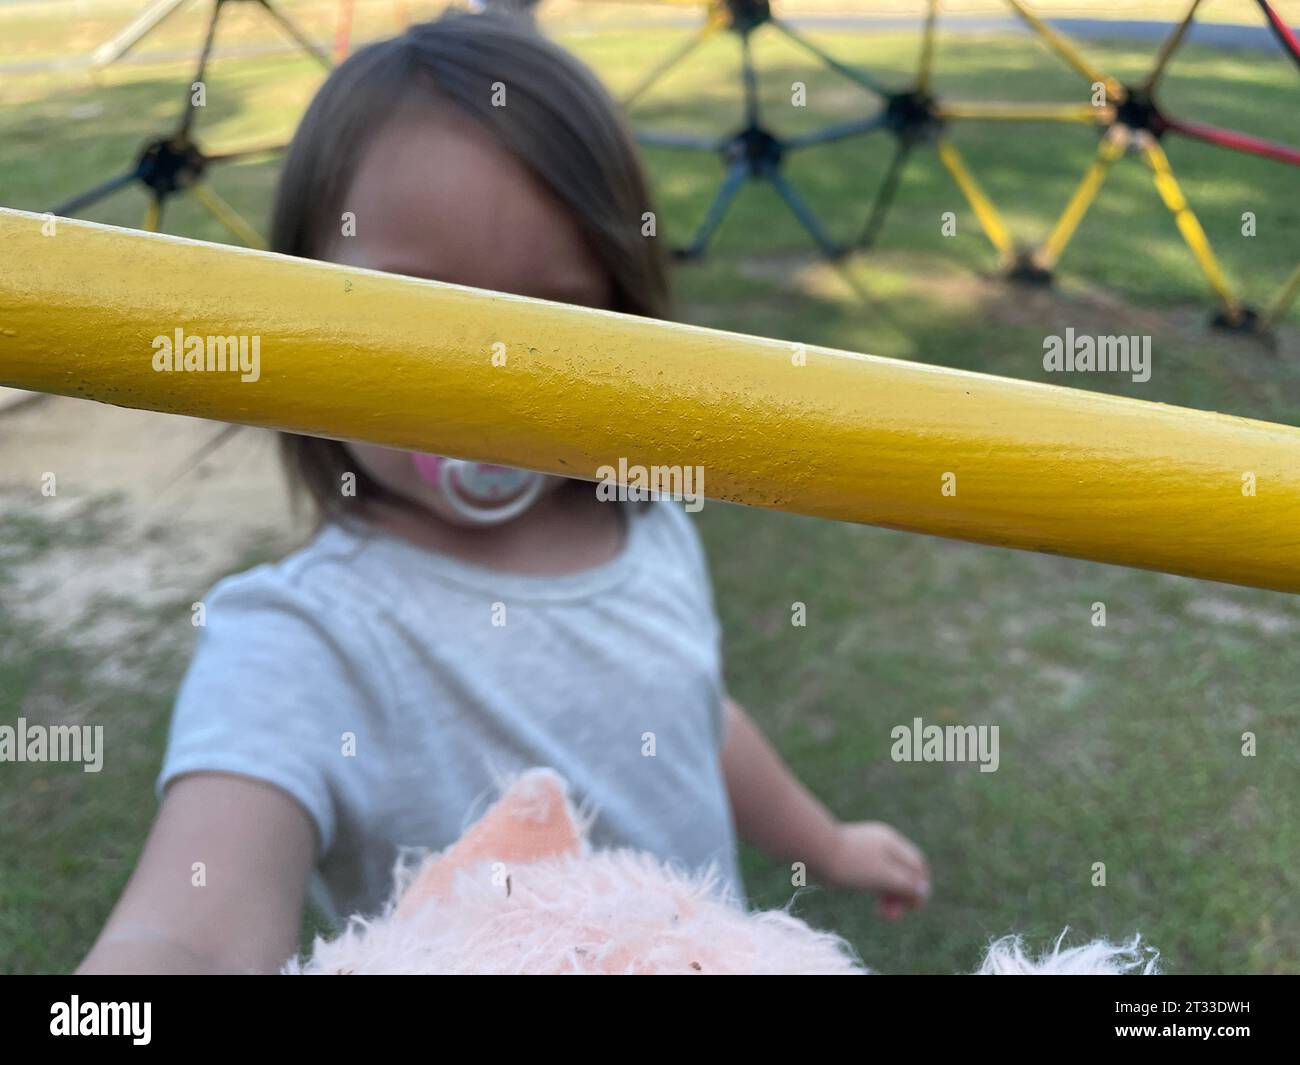 Yellow bar monkey bars Toddler playing at the park background Stock Photo